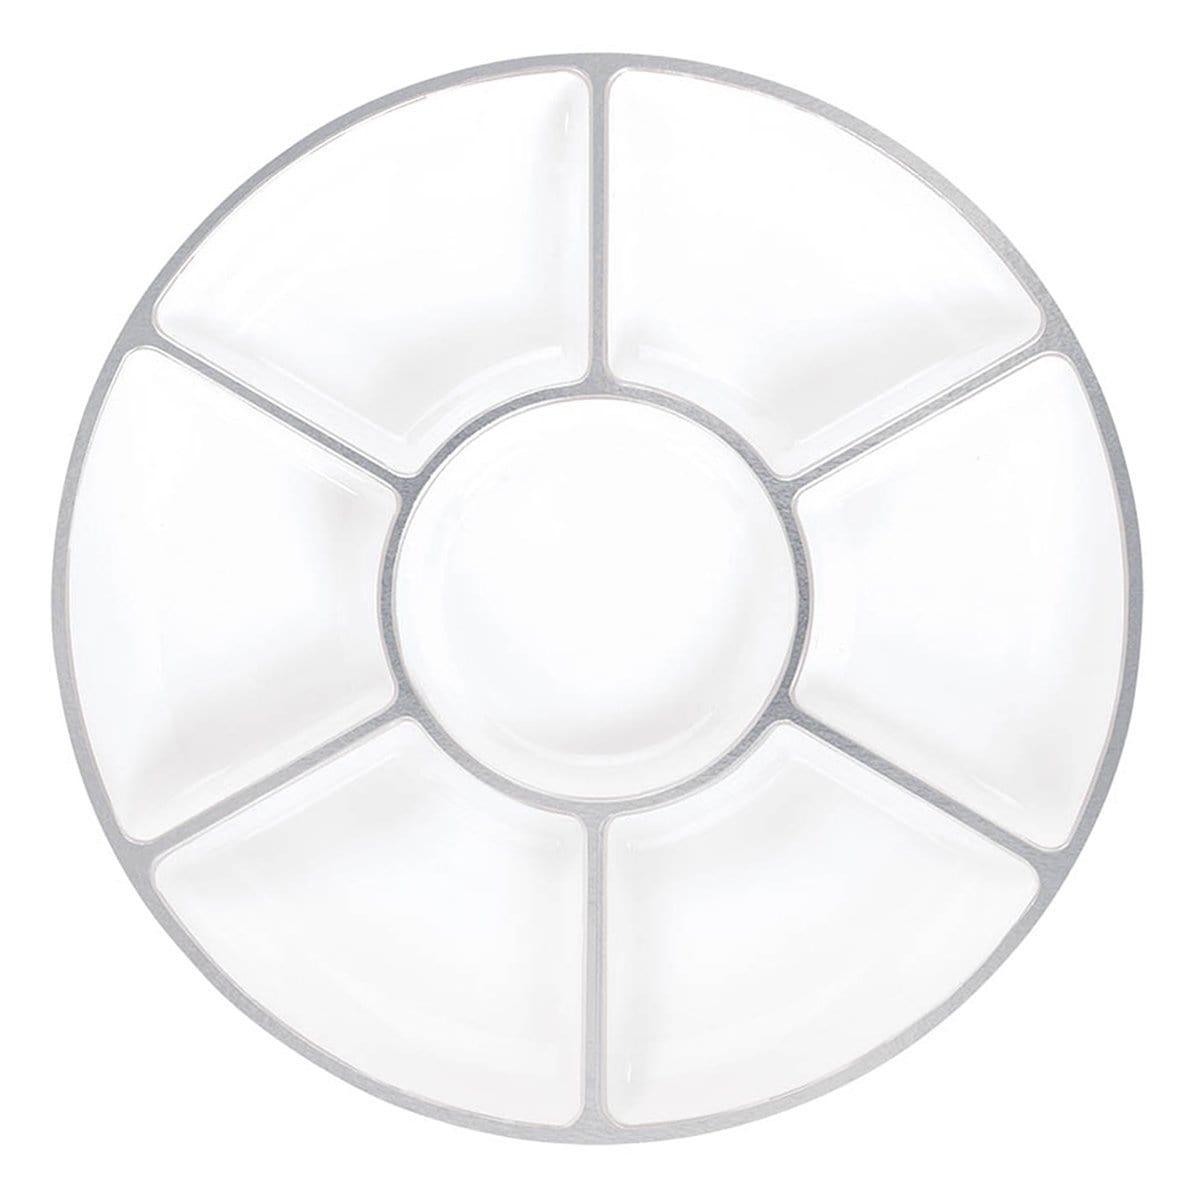 Buy Plasticware Compartment Tray - White & Silver sold at Party Expert